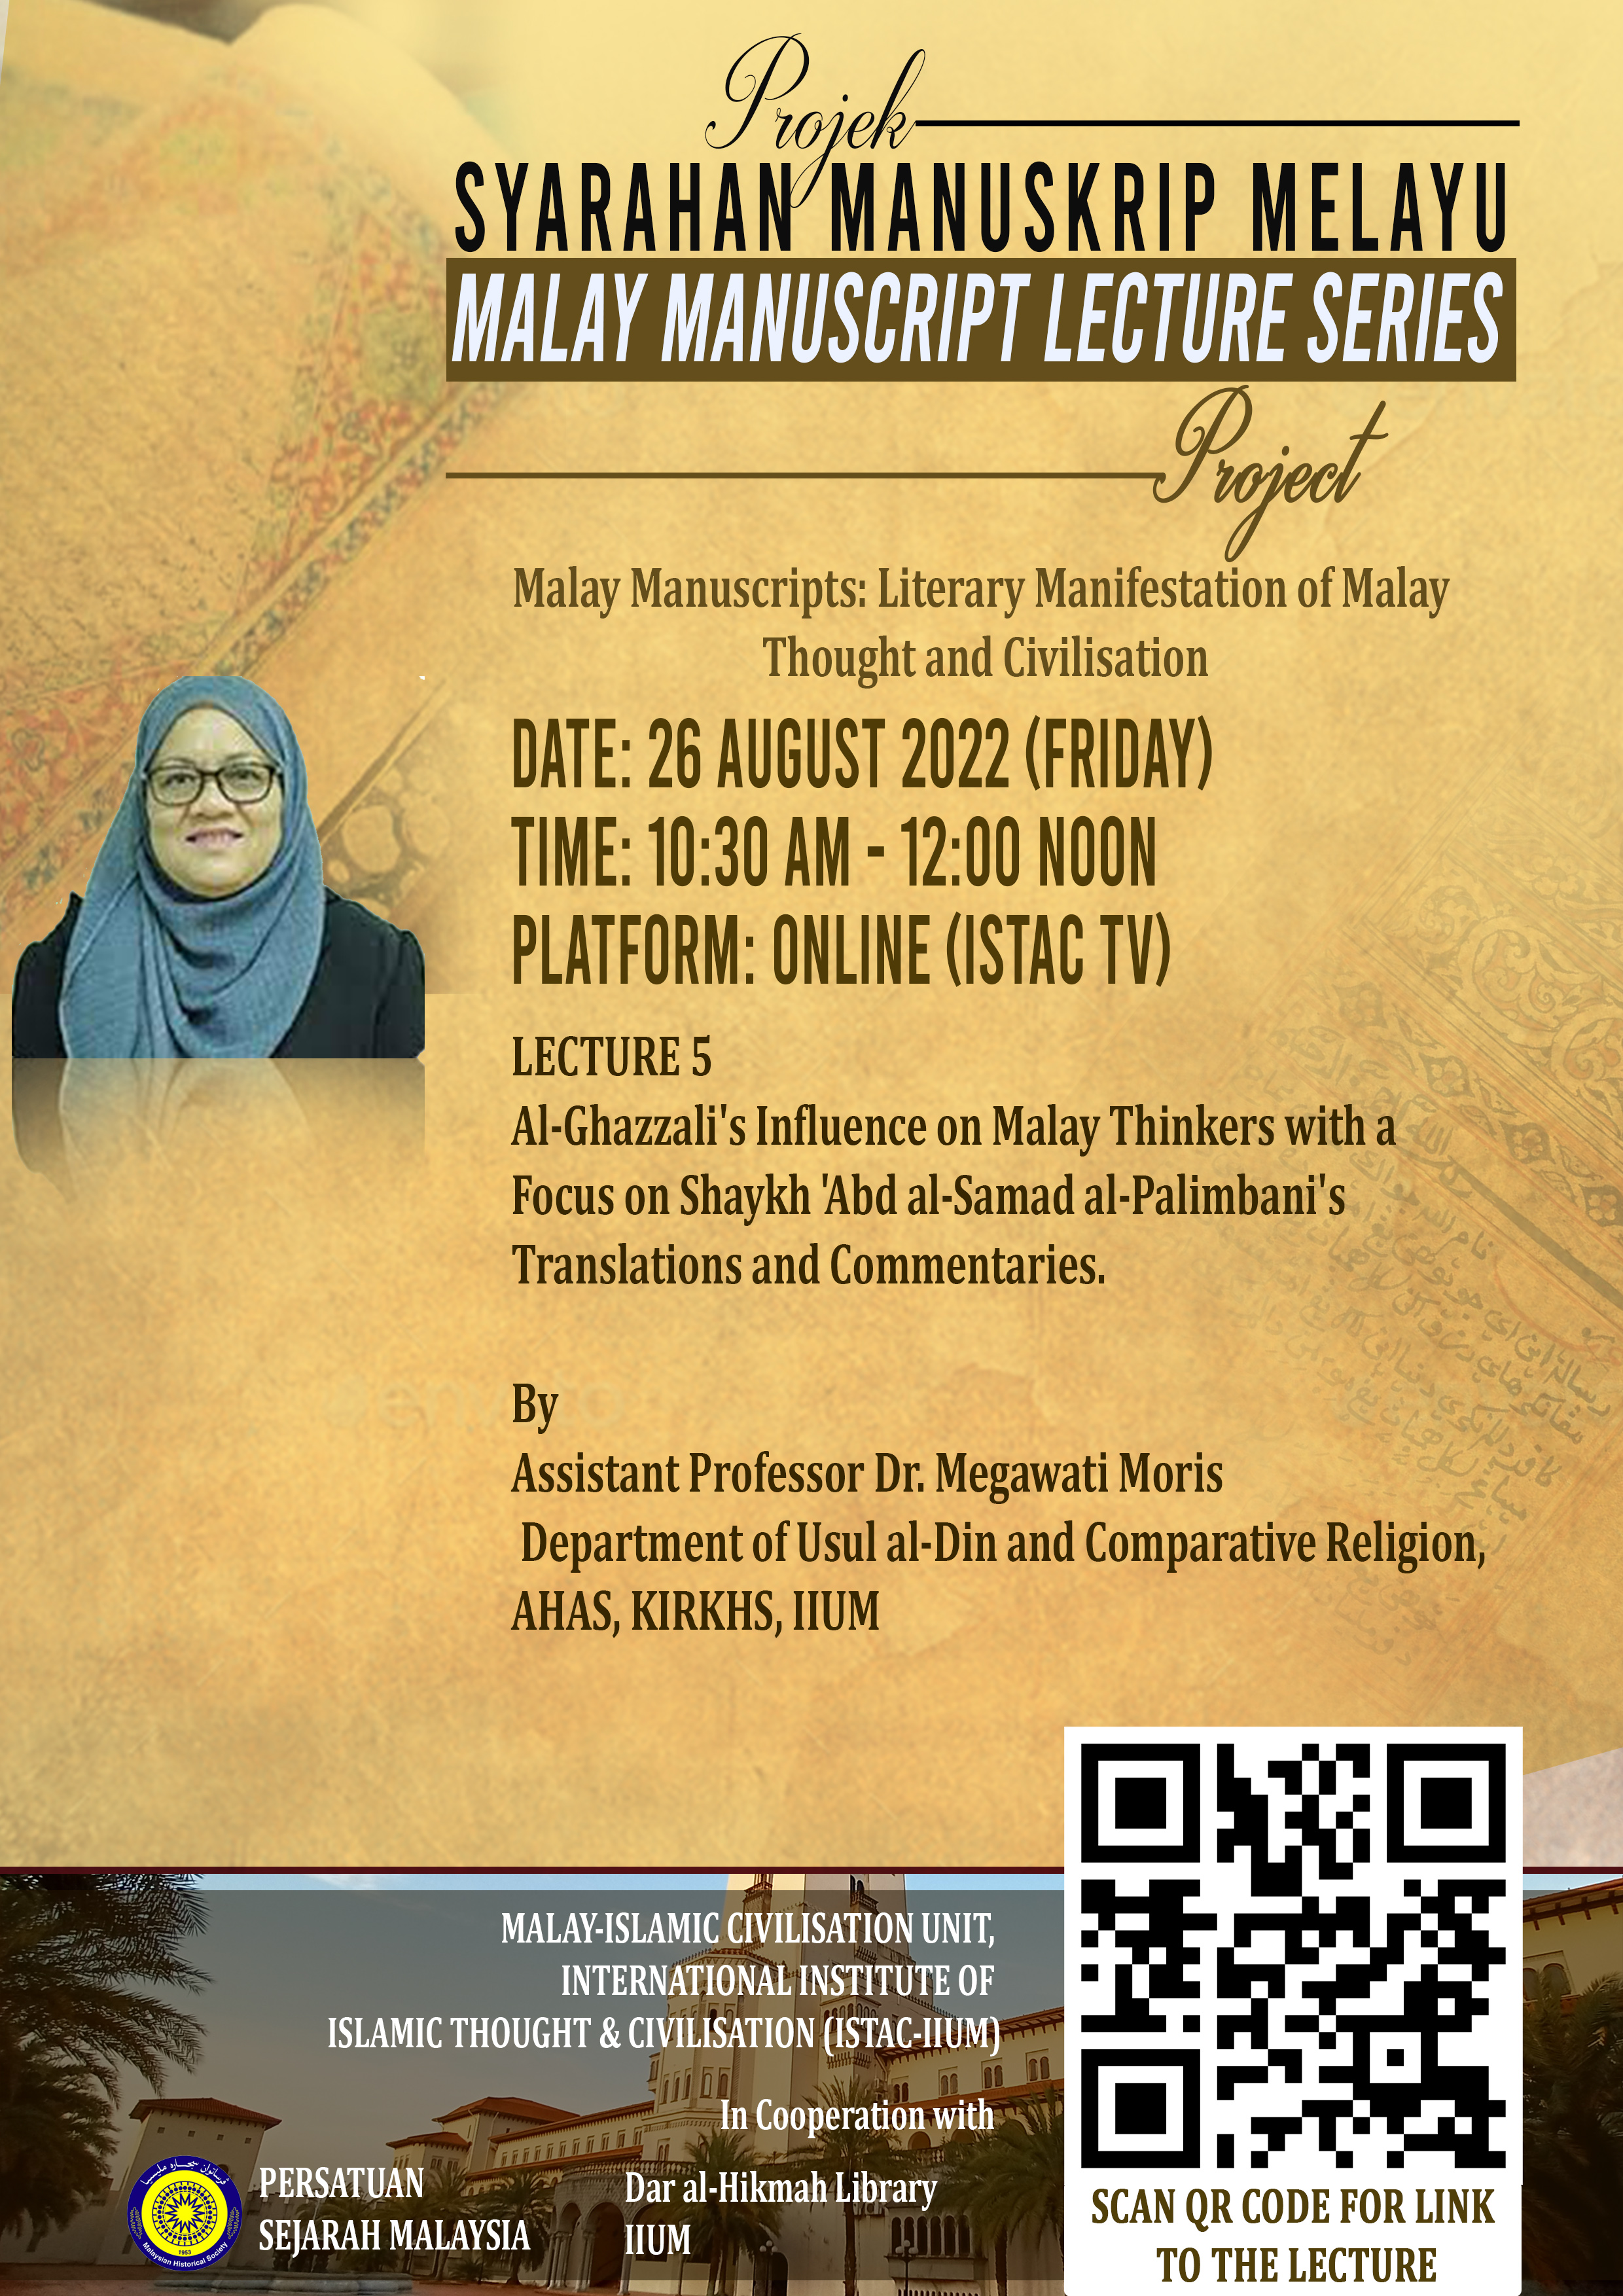 MALAY MANUSCRIPT LECTURE SERIES_LECTURE 5